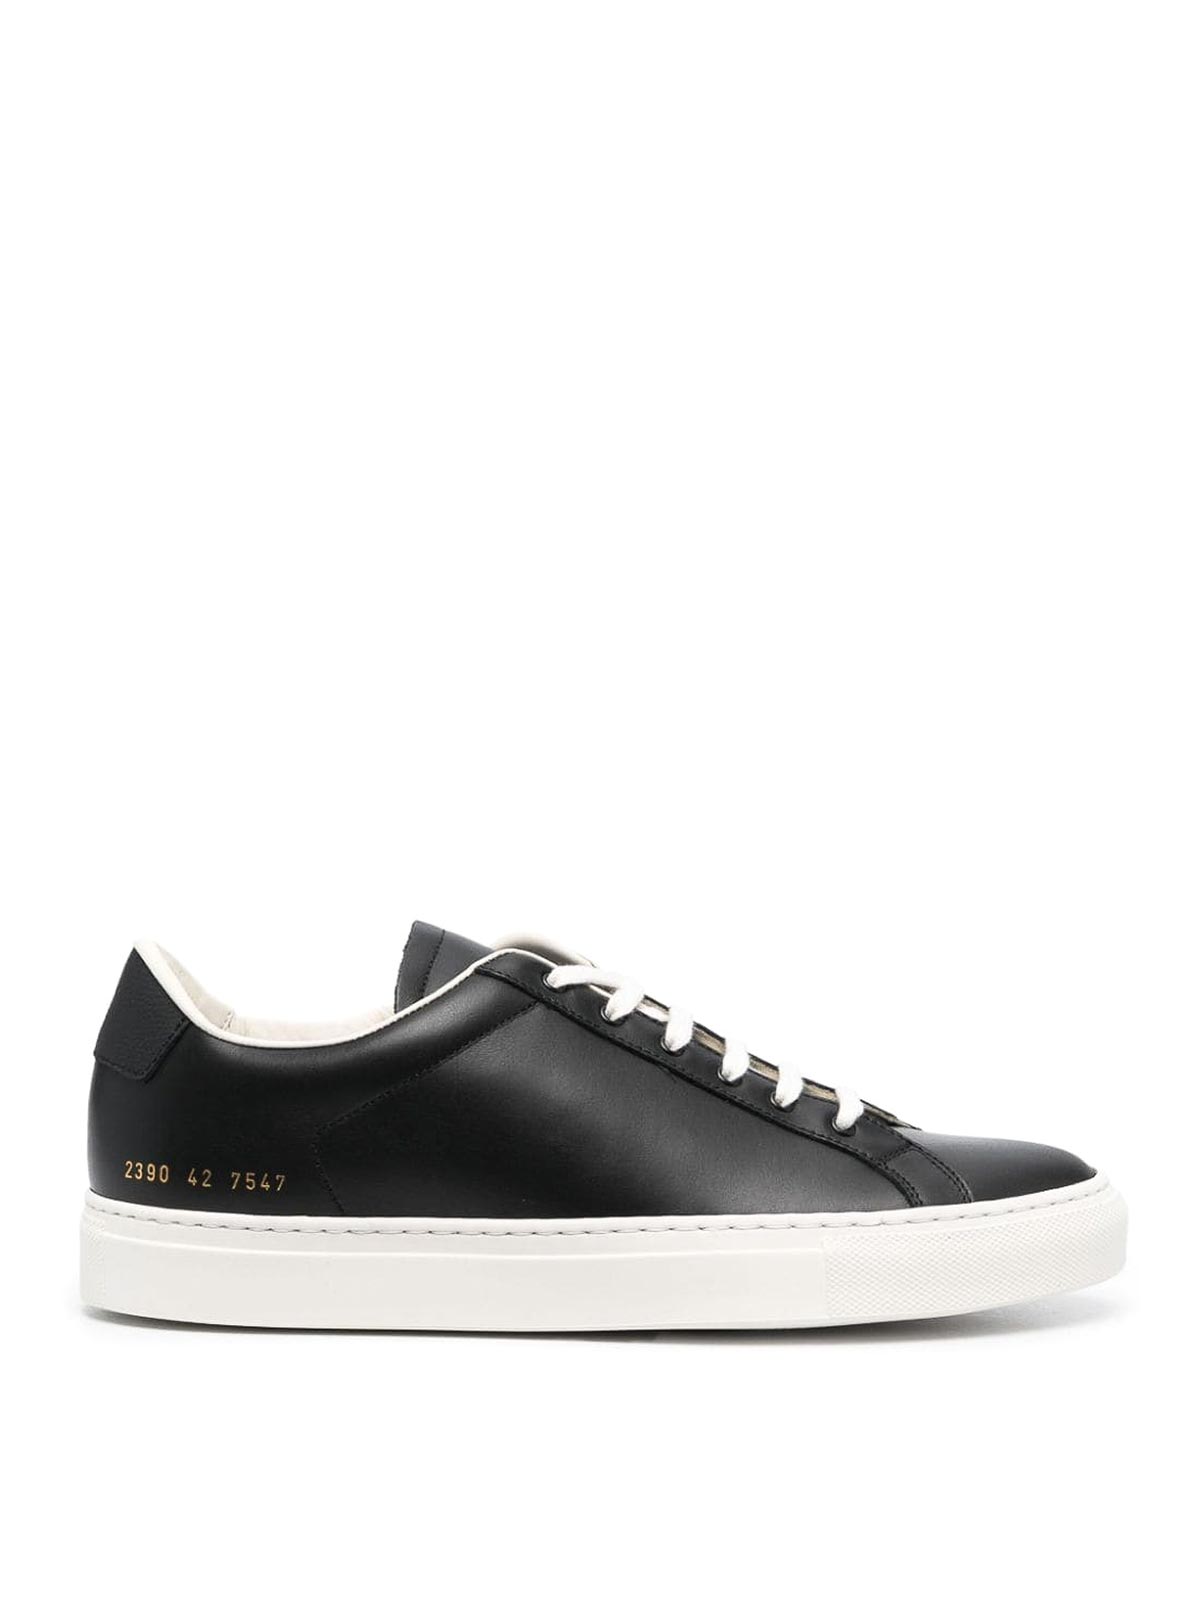 Shop Common Projects 2390 Retro Sneakers In Black